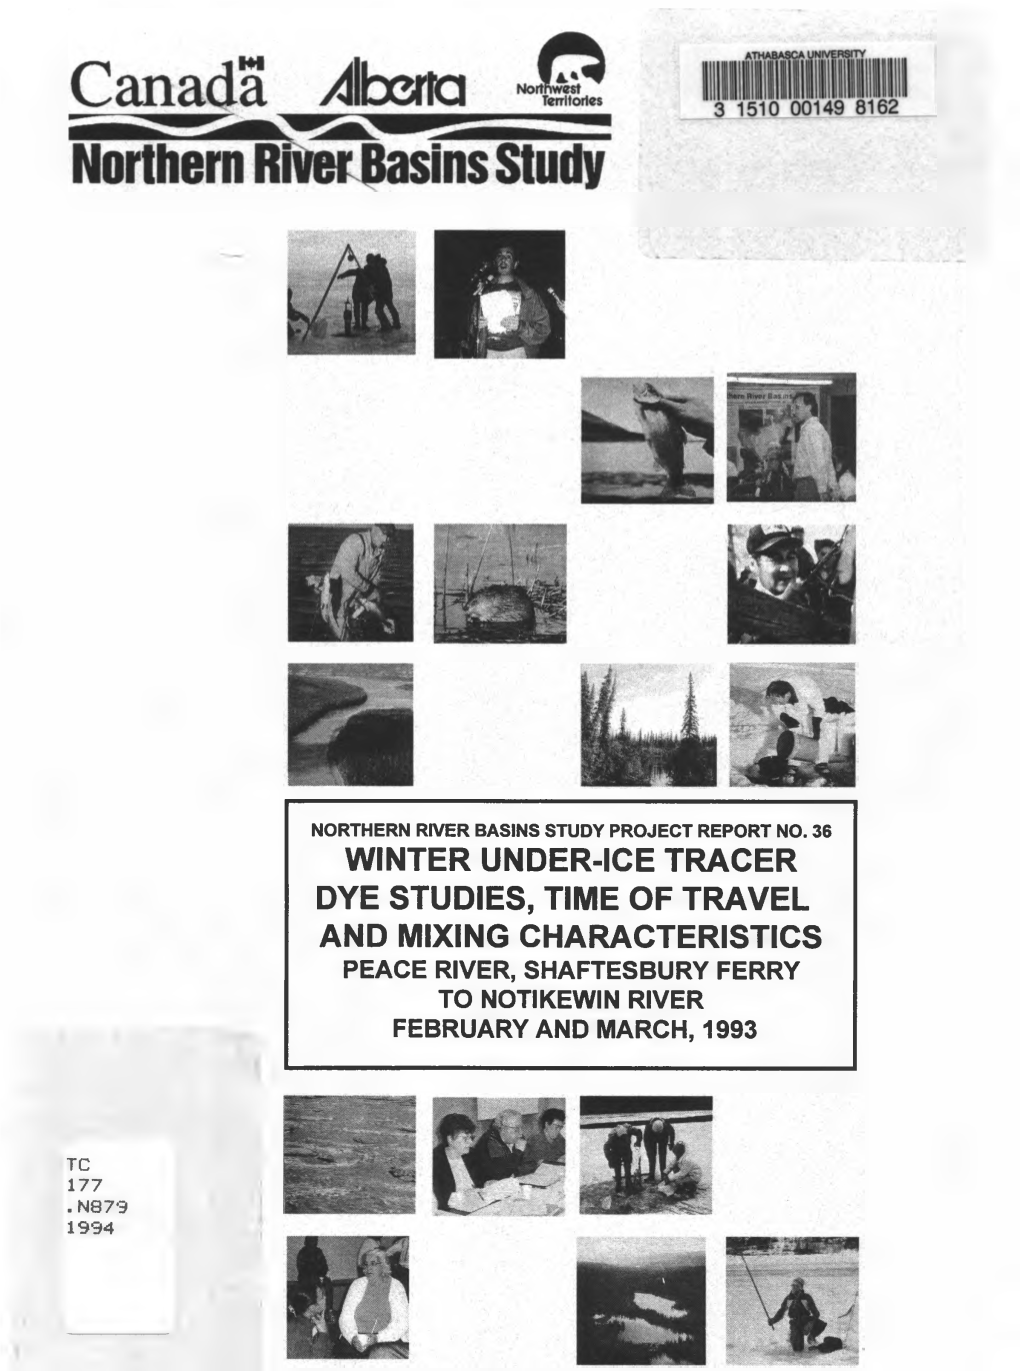 Winter Under-Ice Tracer Dye Studies, Time of Travel and Mixing Characteristics Peace River, Shaftesbury Ferry to Notikewin River February and March, 1993